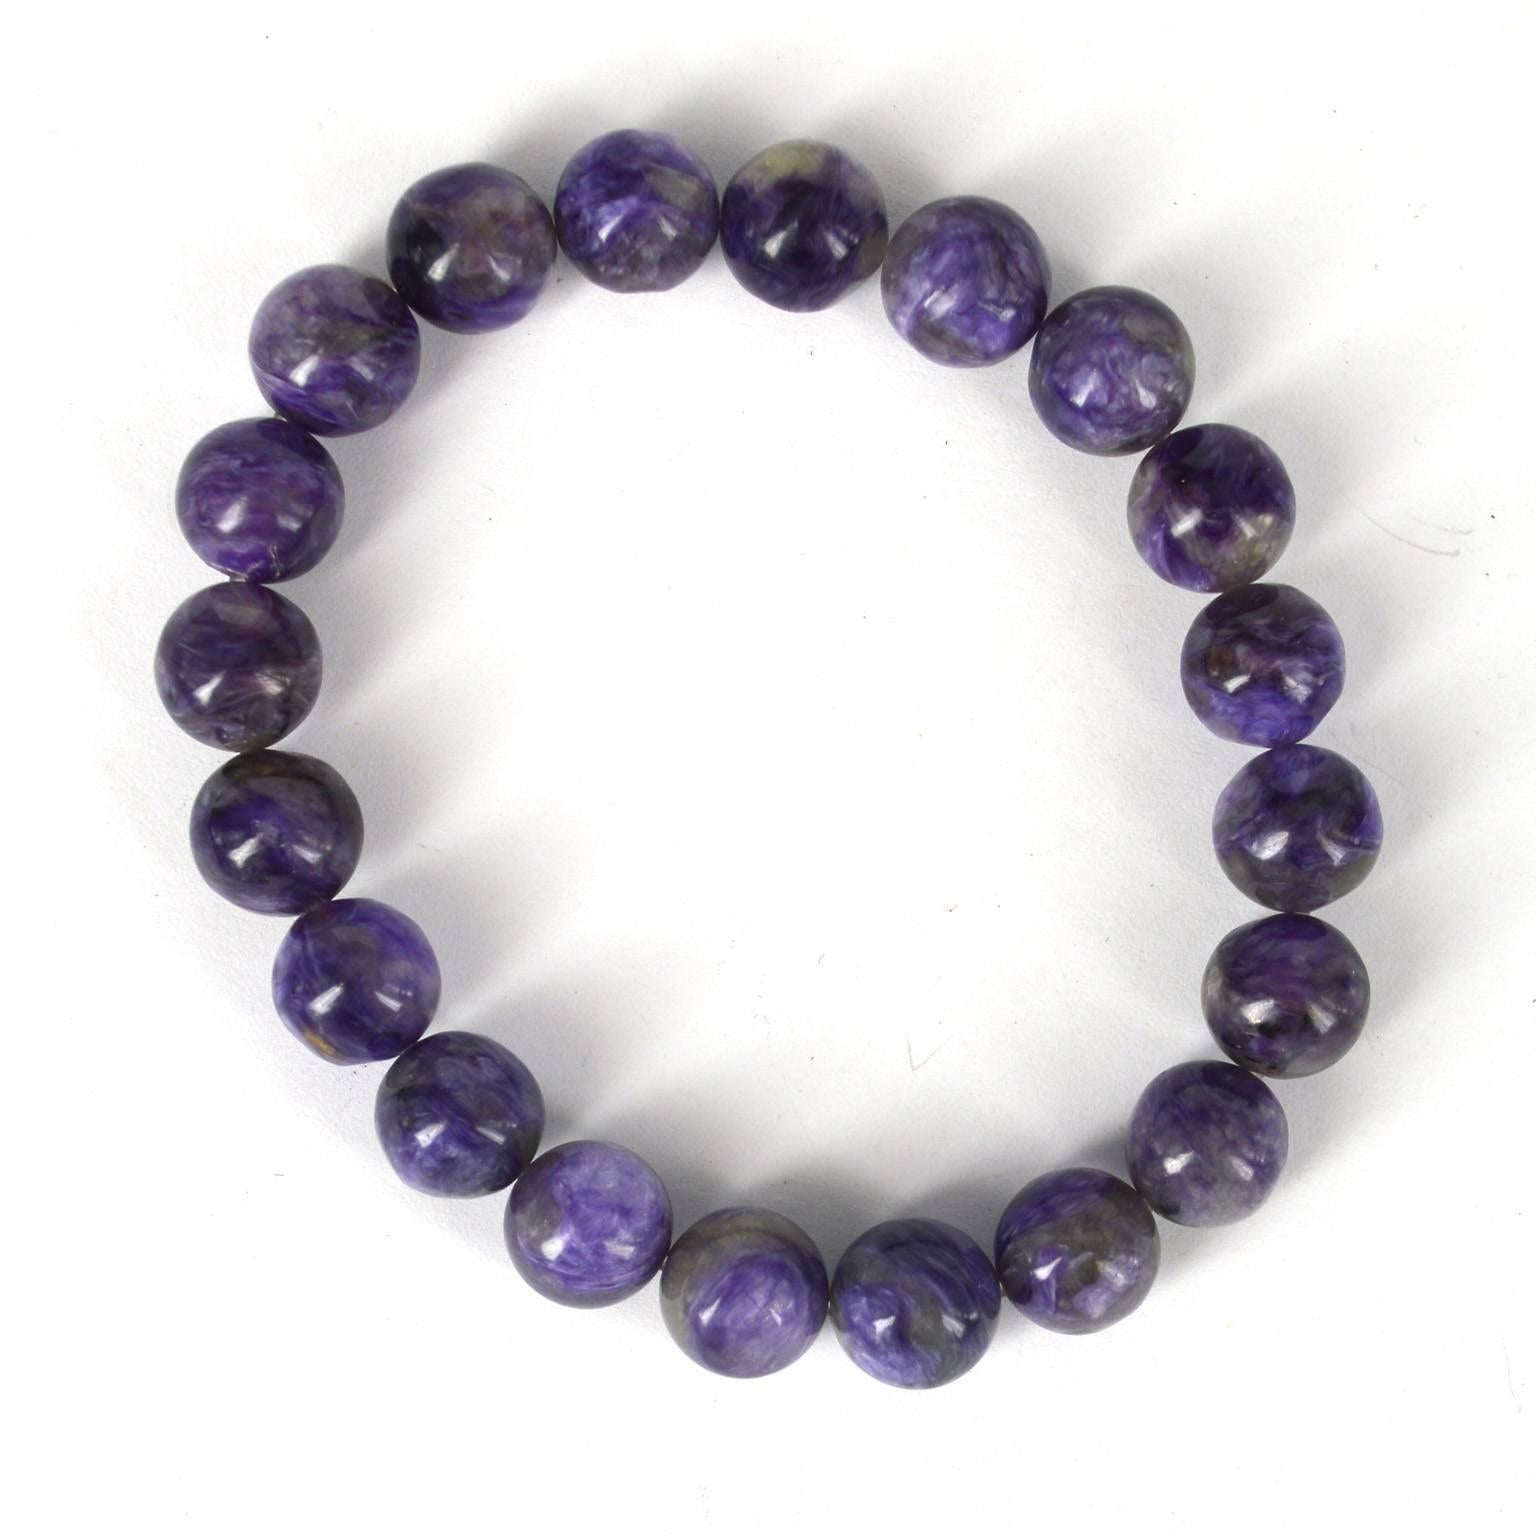 10mm polished Charite beads threaded on elastic.
20 x high quality Charite beads
Charoite is a rare silicate mineral with a very complex chemical composition of phosphorus, calcium, and sodium. ... The colors of charoite are indeed unmistakable and